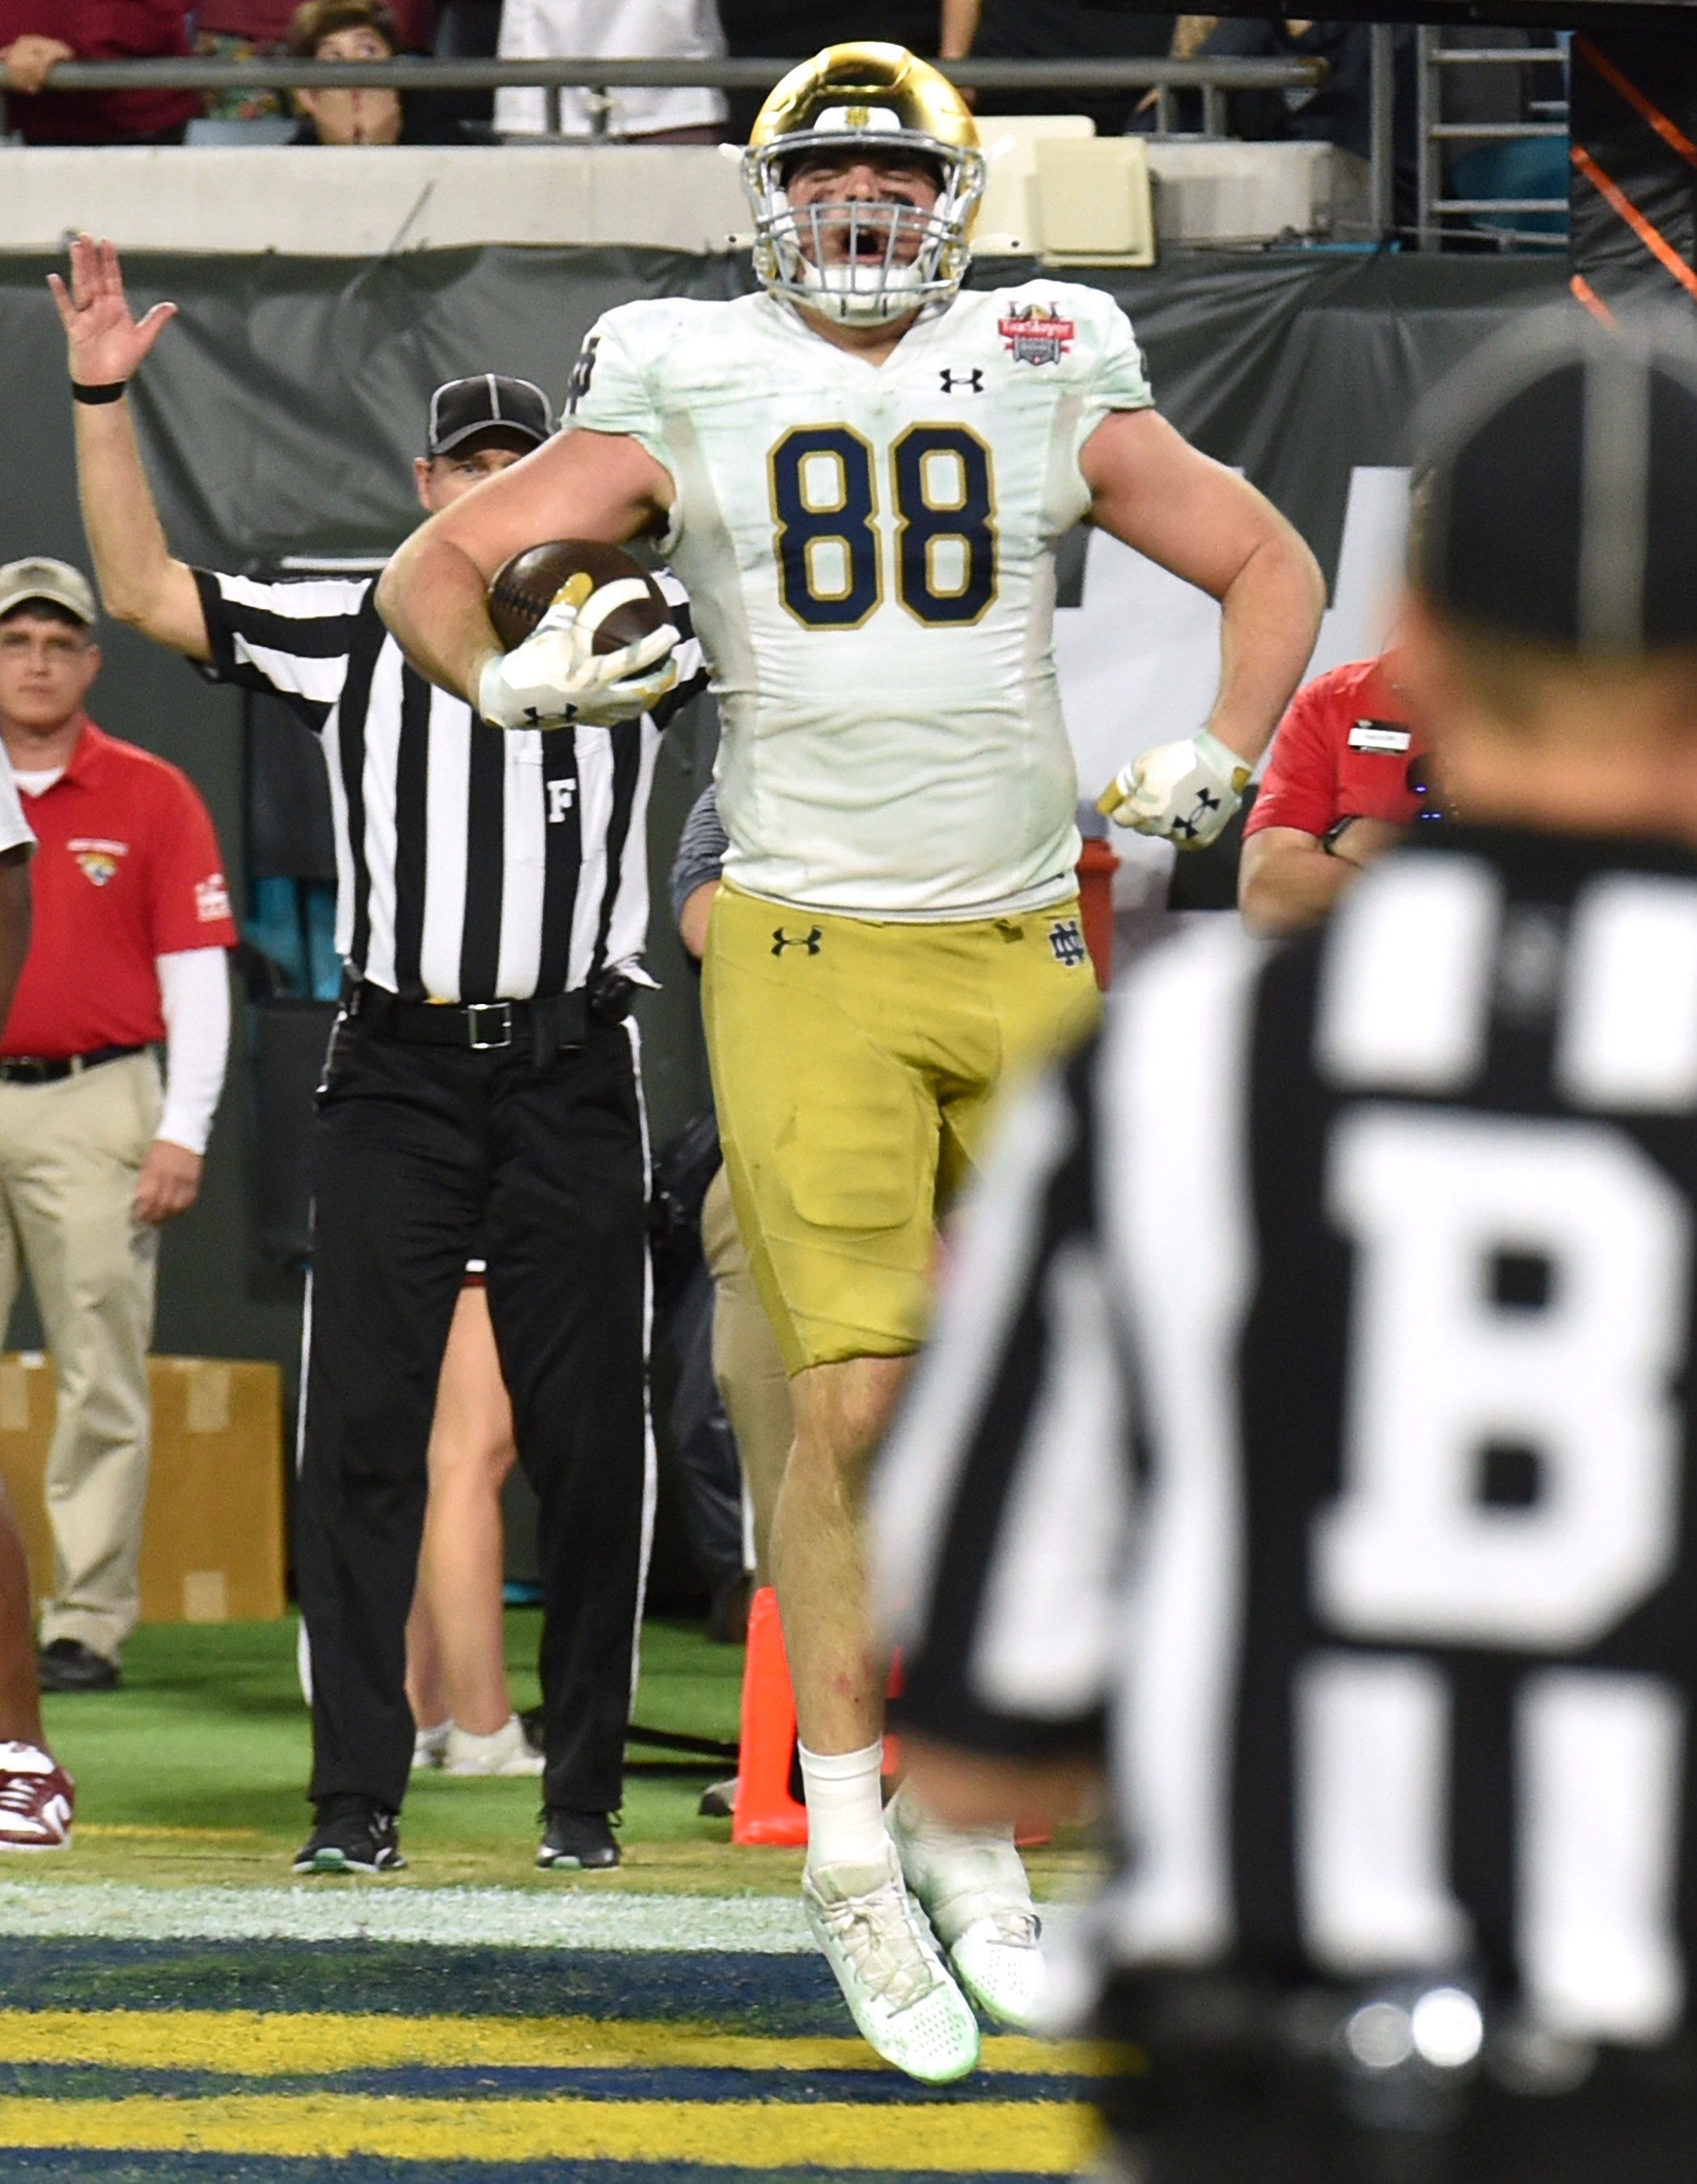 Notre Dame Fighting Irish tight end Mitchell Evans (88) celebrates after pulling in a pass that he took to the end zone for the game winning touchdown with just over a minute and a half to play in the game. The University of Notre Dame Fighting Irish took on the University of South Carolina Gamecocks in the TaxSlayer Gator Bowl game in Jacksonville, Florida's TIAA Bank Field Friday, December 30, 2022. The first half ended with South Carolina holding a 24 to 17 lead but Notre Dame came back and with a late fourth quarter touchdown, won the game 45 to 38. [Bob Self/Florida Times-Union]

Jki 123022 Bs Gatorbowl 24